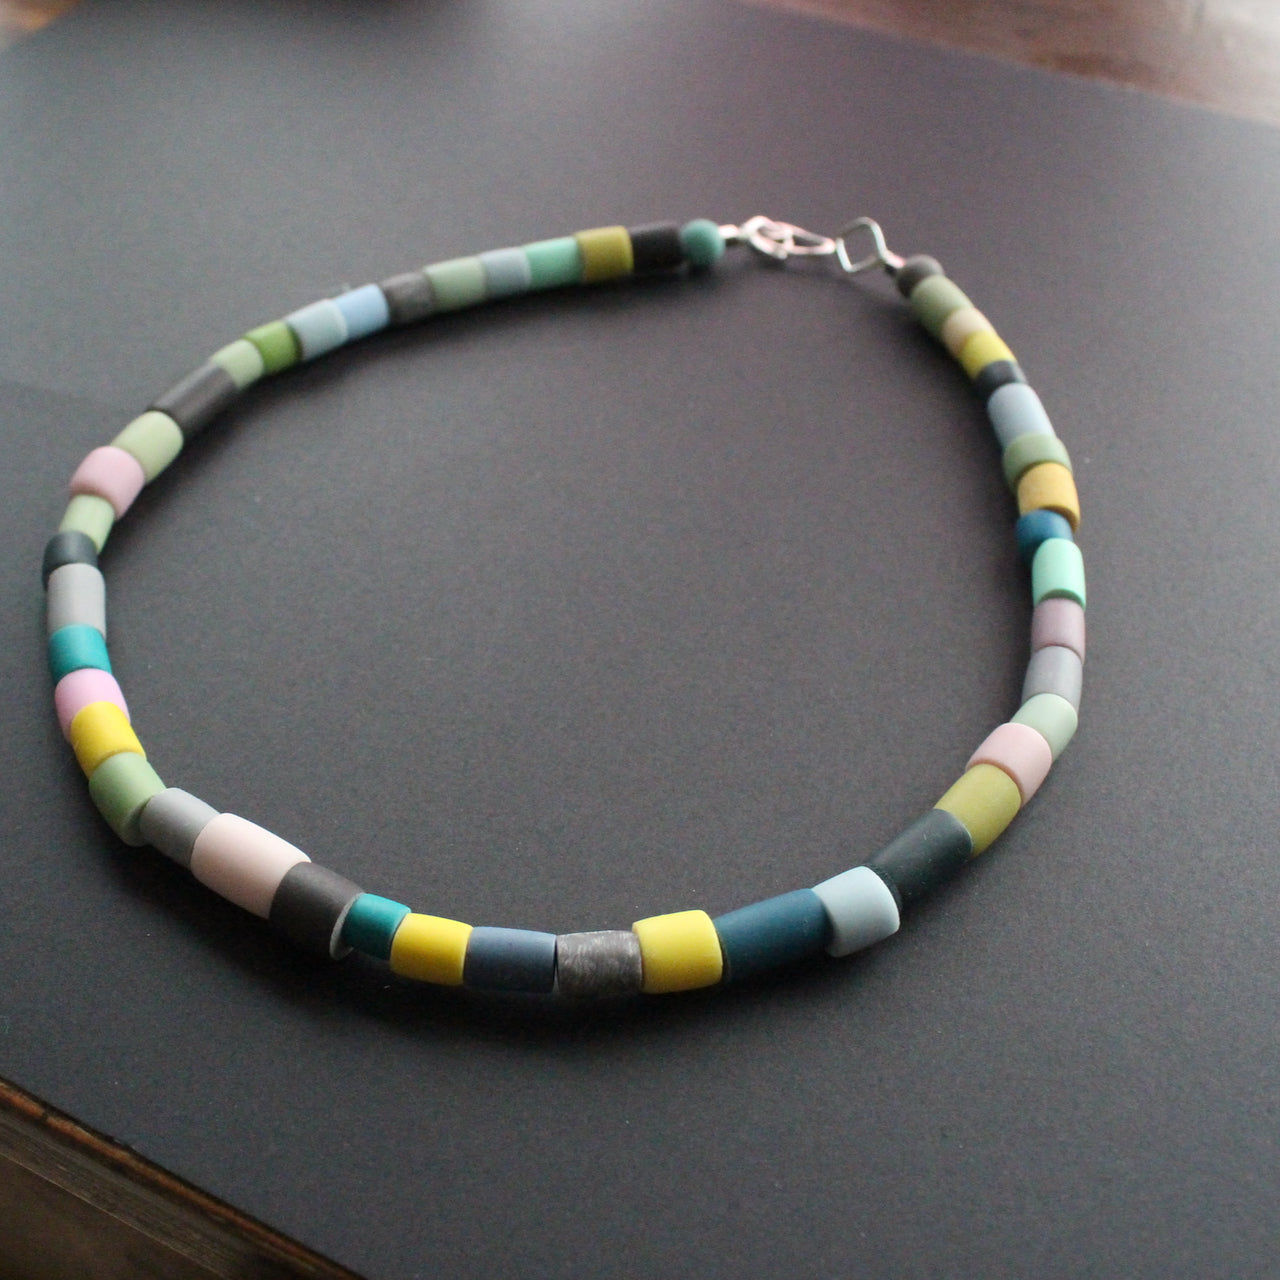 Tube bead polymer clay necklace in muted earth colours by UK artist Clare Lloyd